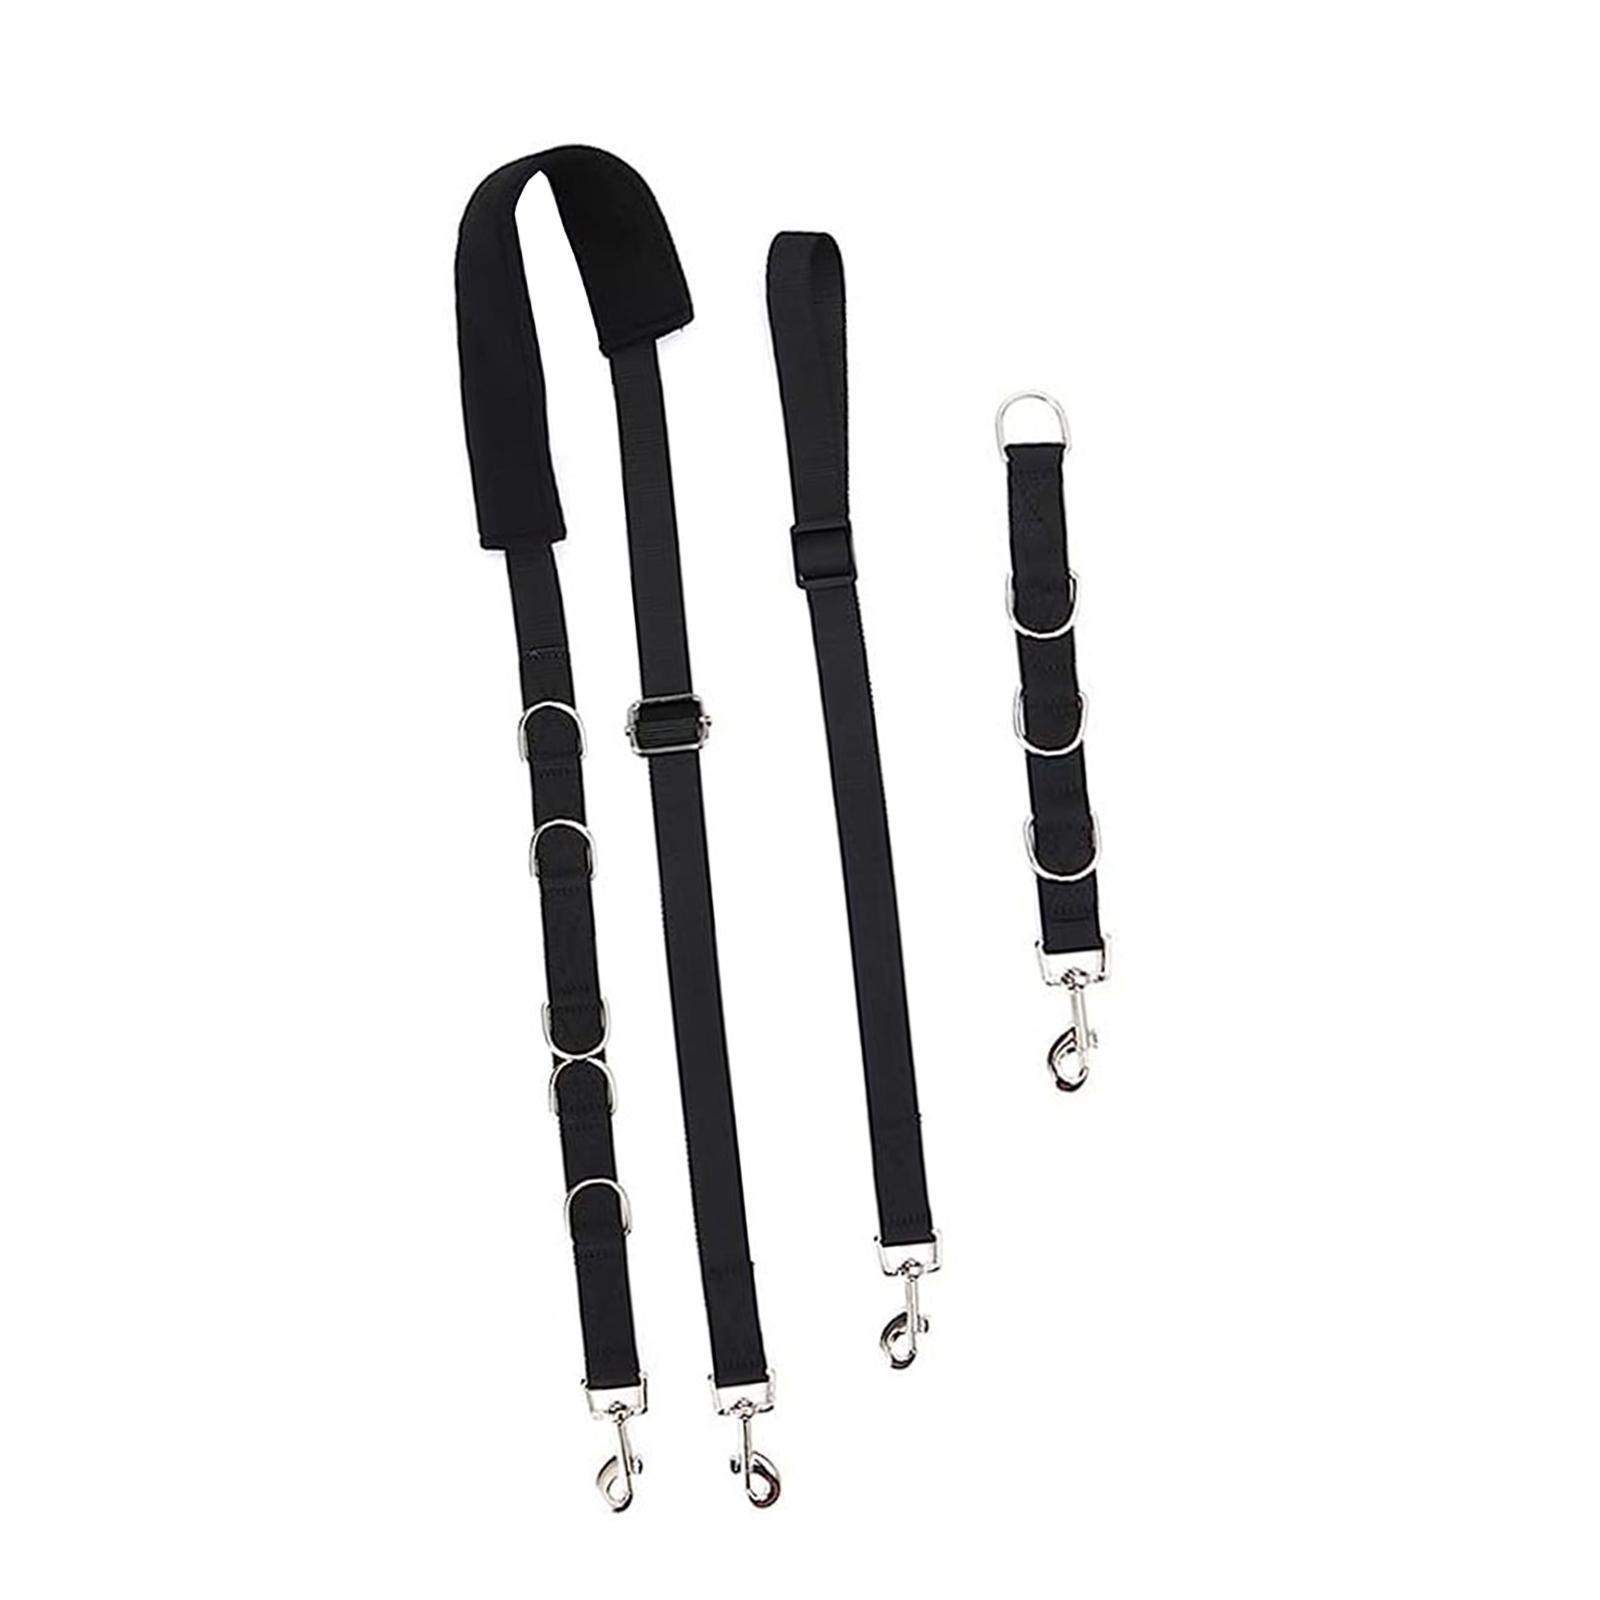 Pet Grooming Belly Strap Leash Dog Grooming Loop Dog Bathing Strap for Puppy